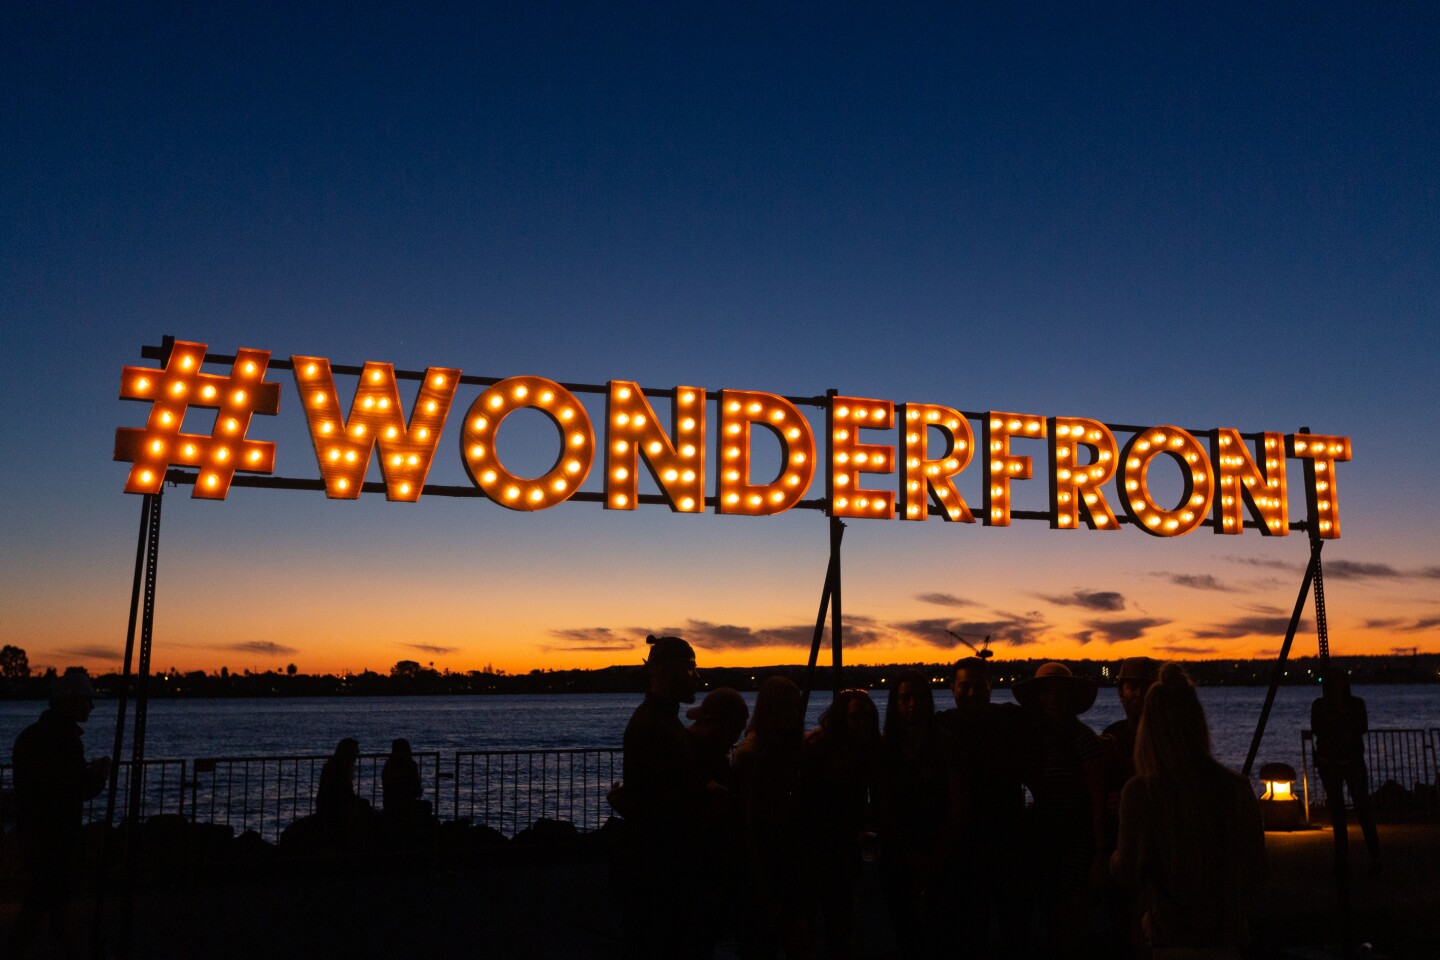 Festival-goers at Wonderfront Music & Arts Festival enjoyed performances by Miguel, Common Kings, Pepper, Lil Baby and more, along with art installations, brand activations, skateboarding and more on the weekend of Nov. 22-24.